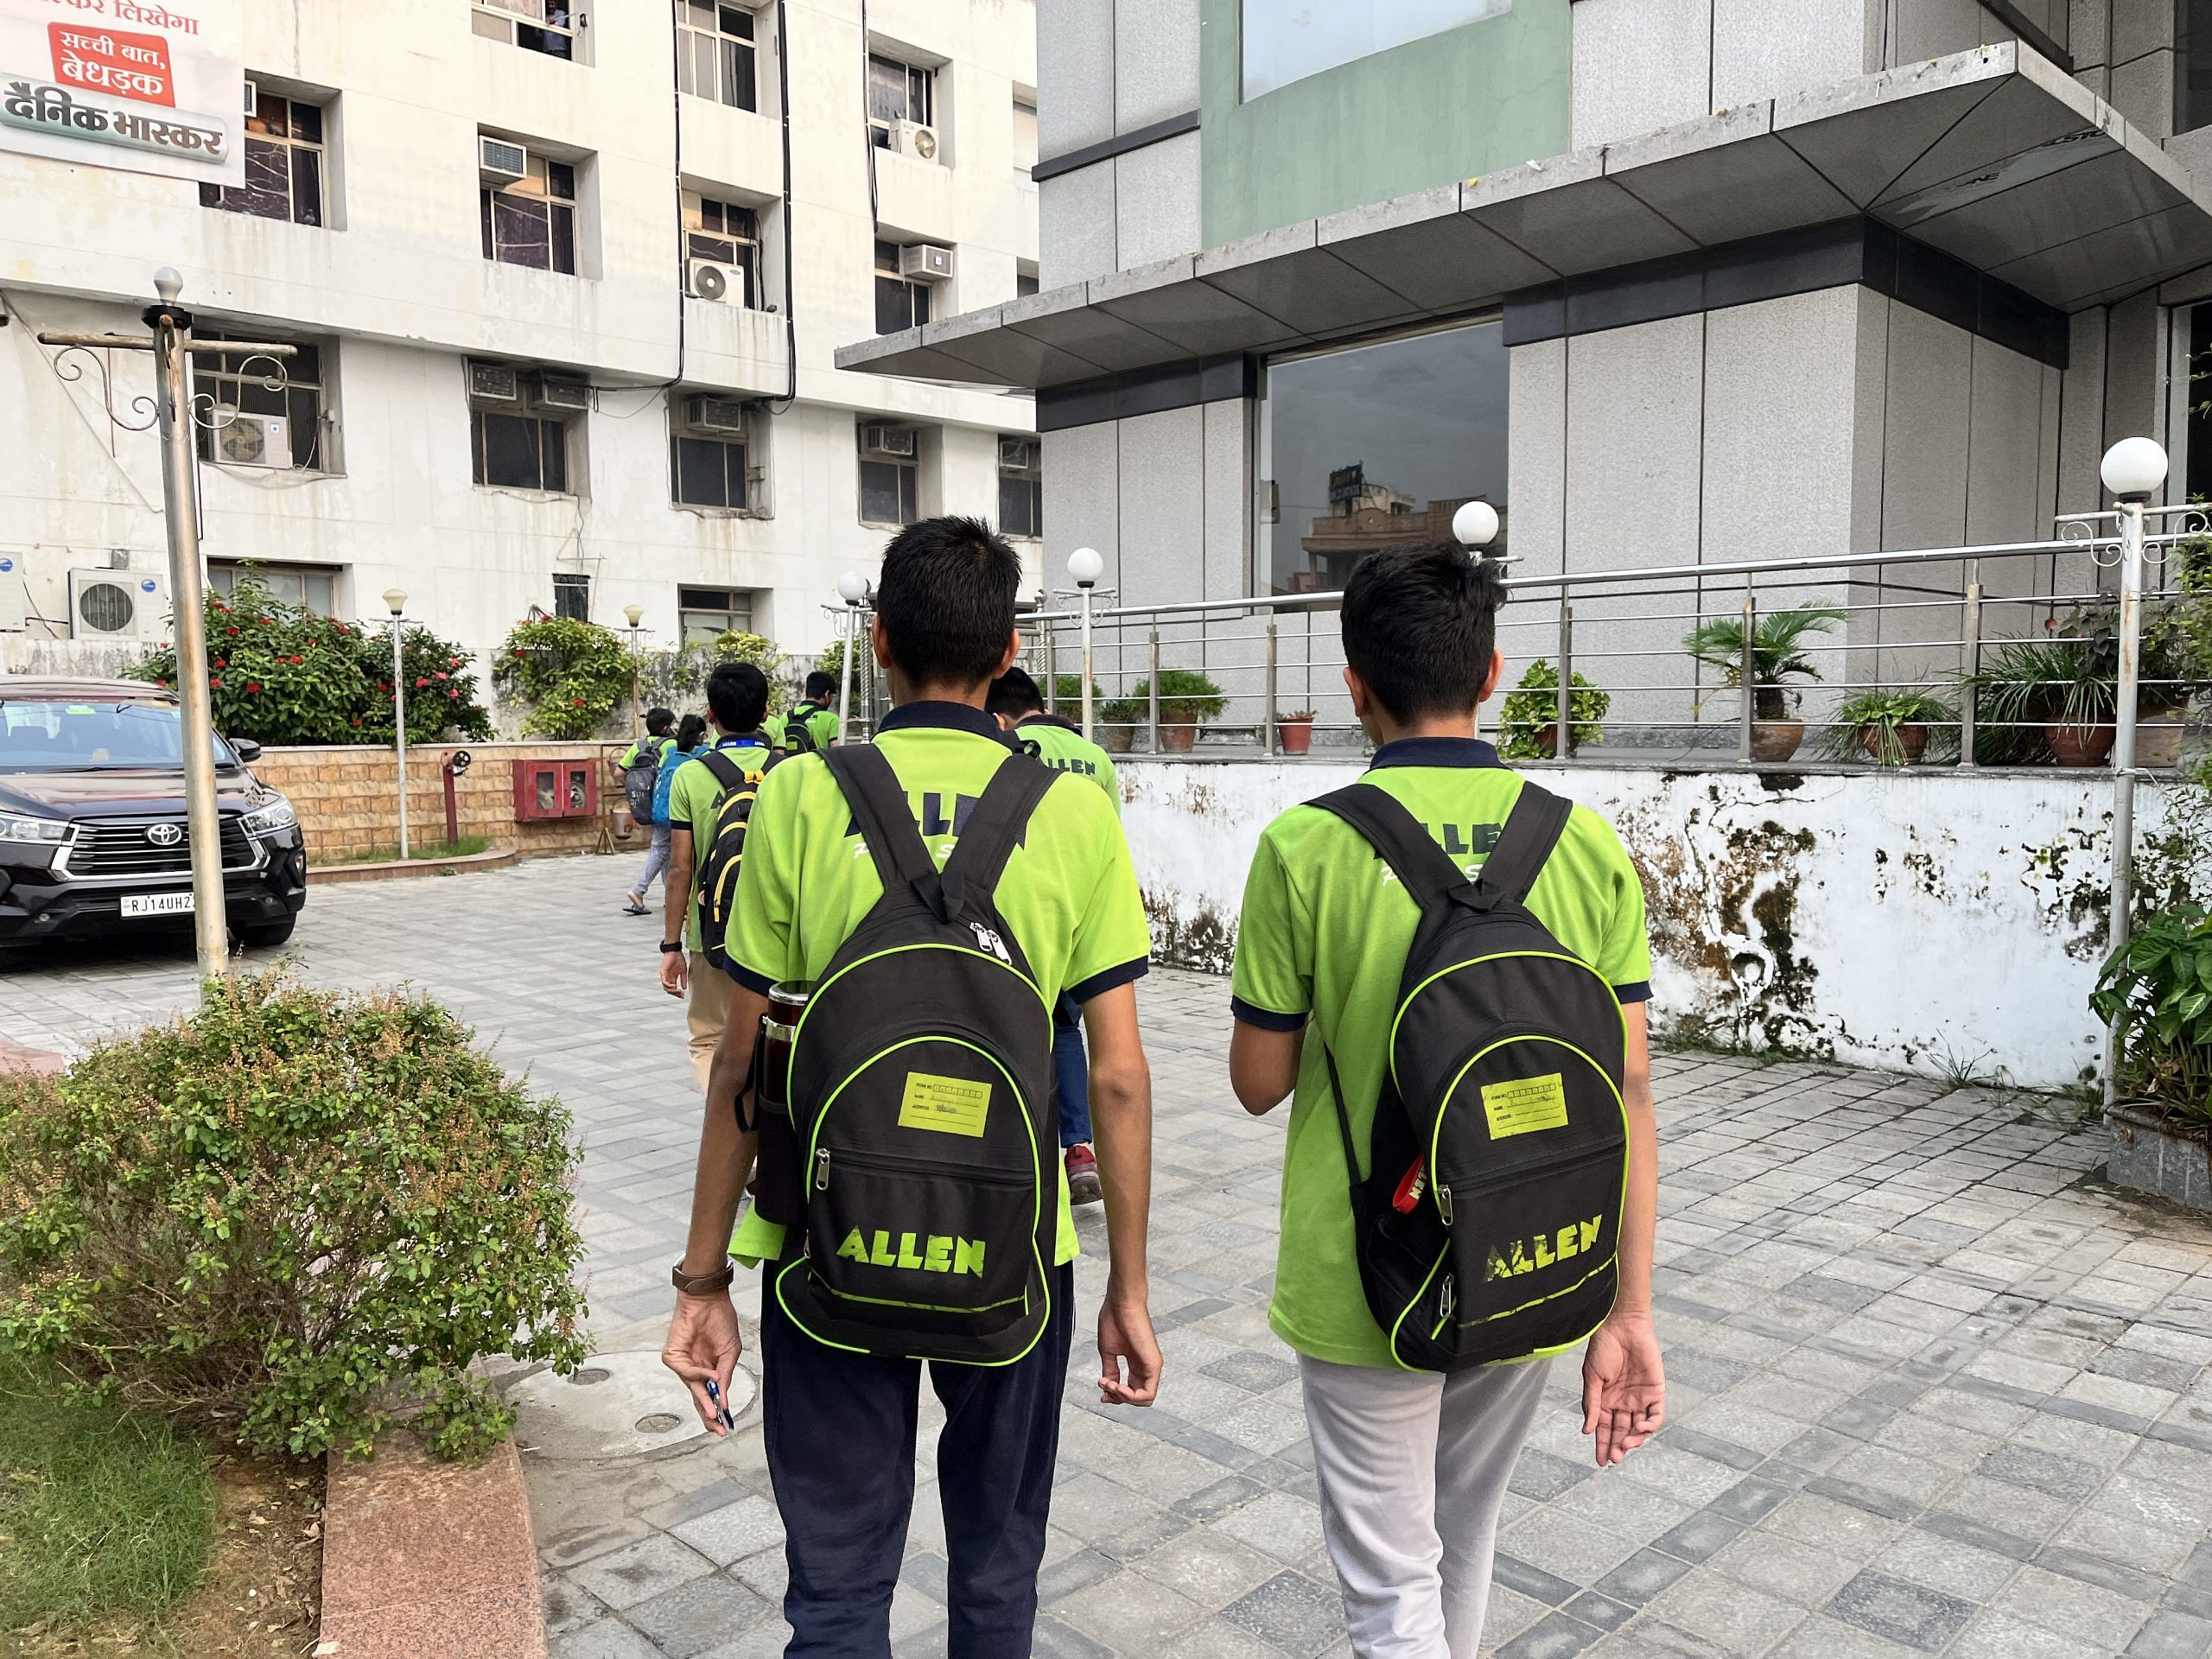 Two students heading towards their classes at 4 o'clock for the Allen coaching centre | Jyoti Yadav, ThePrint